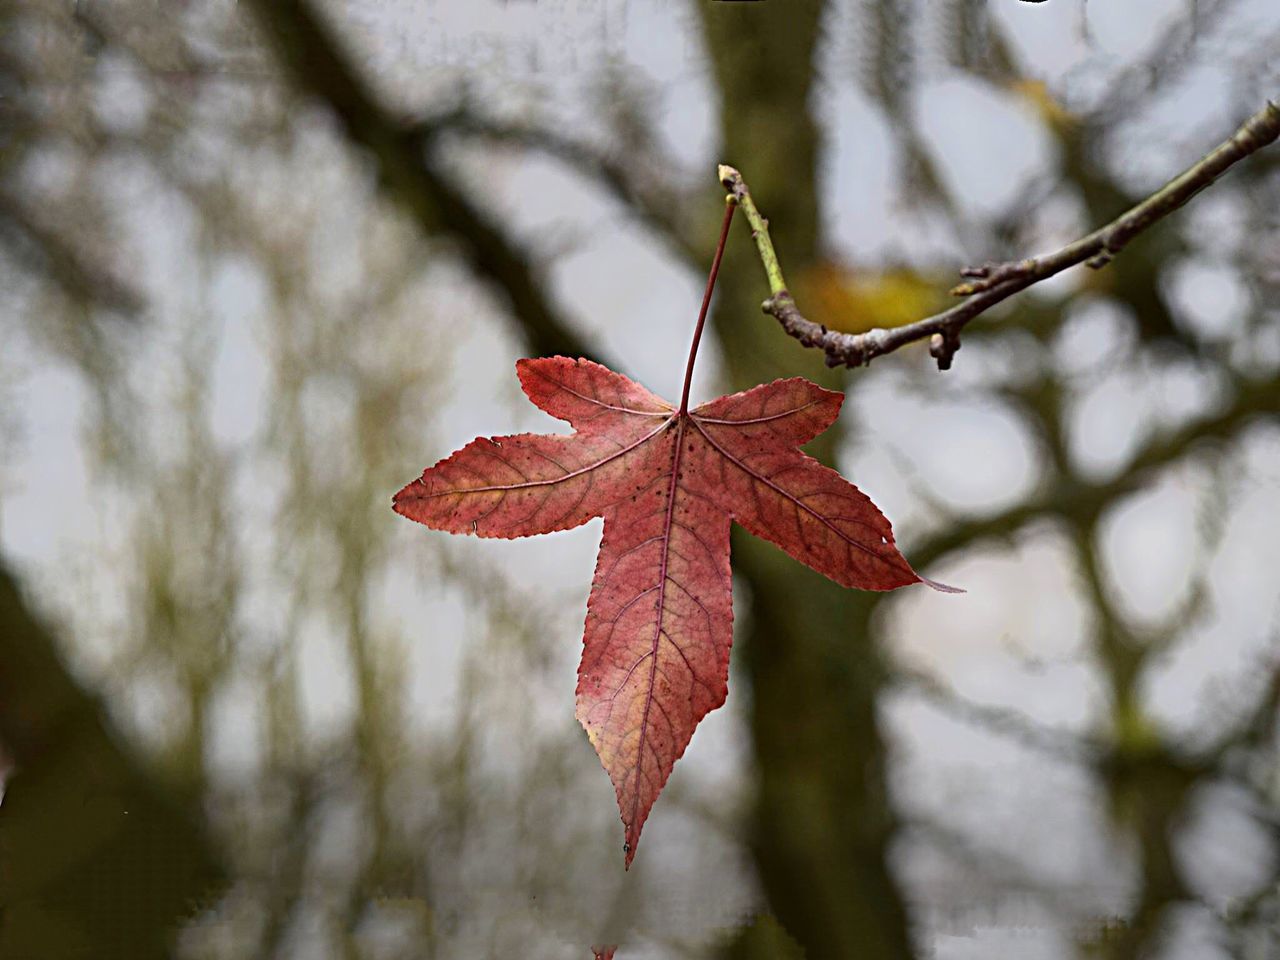 nature, leaf, autumn, maple leaf, change, close-up, outdoors, no people, plant, day, beauty in nature, tree, maple, maroon